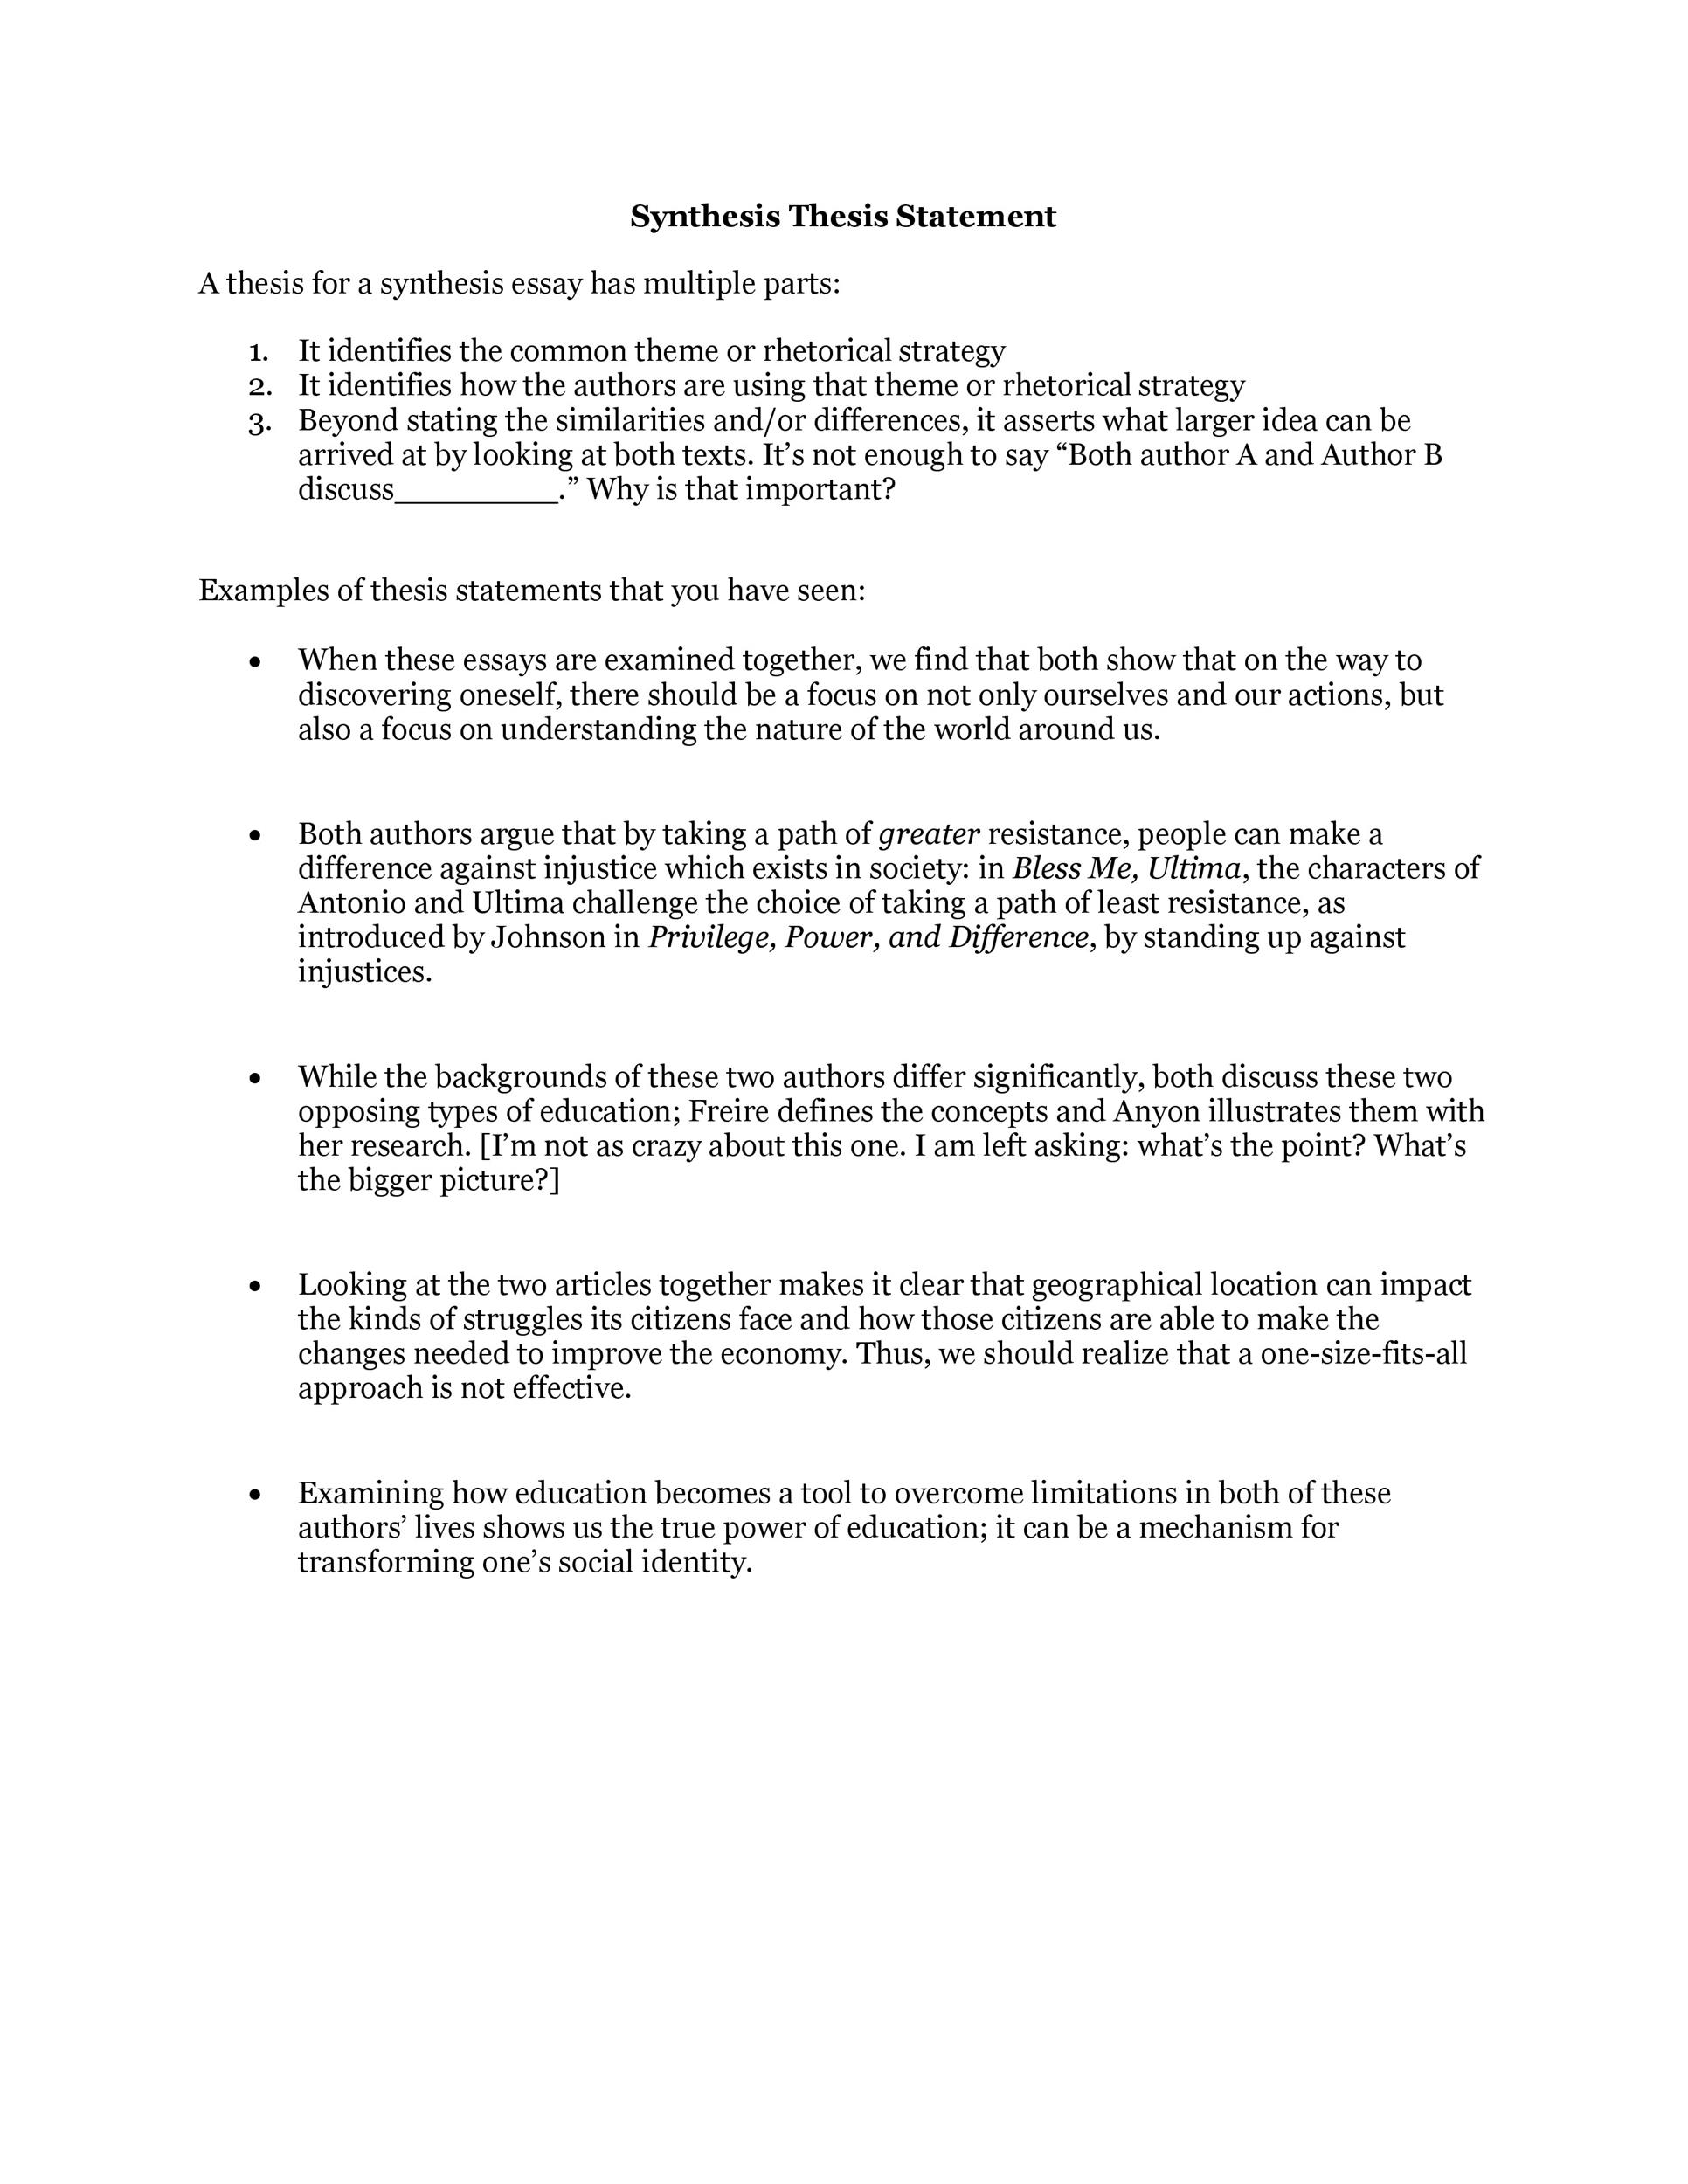 Free thesis statement template 24